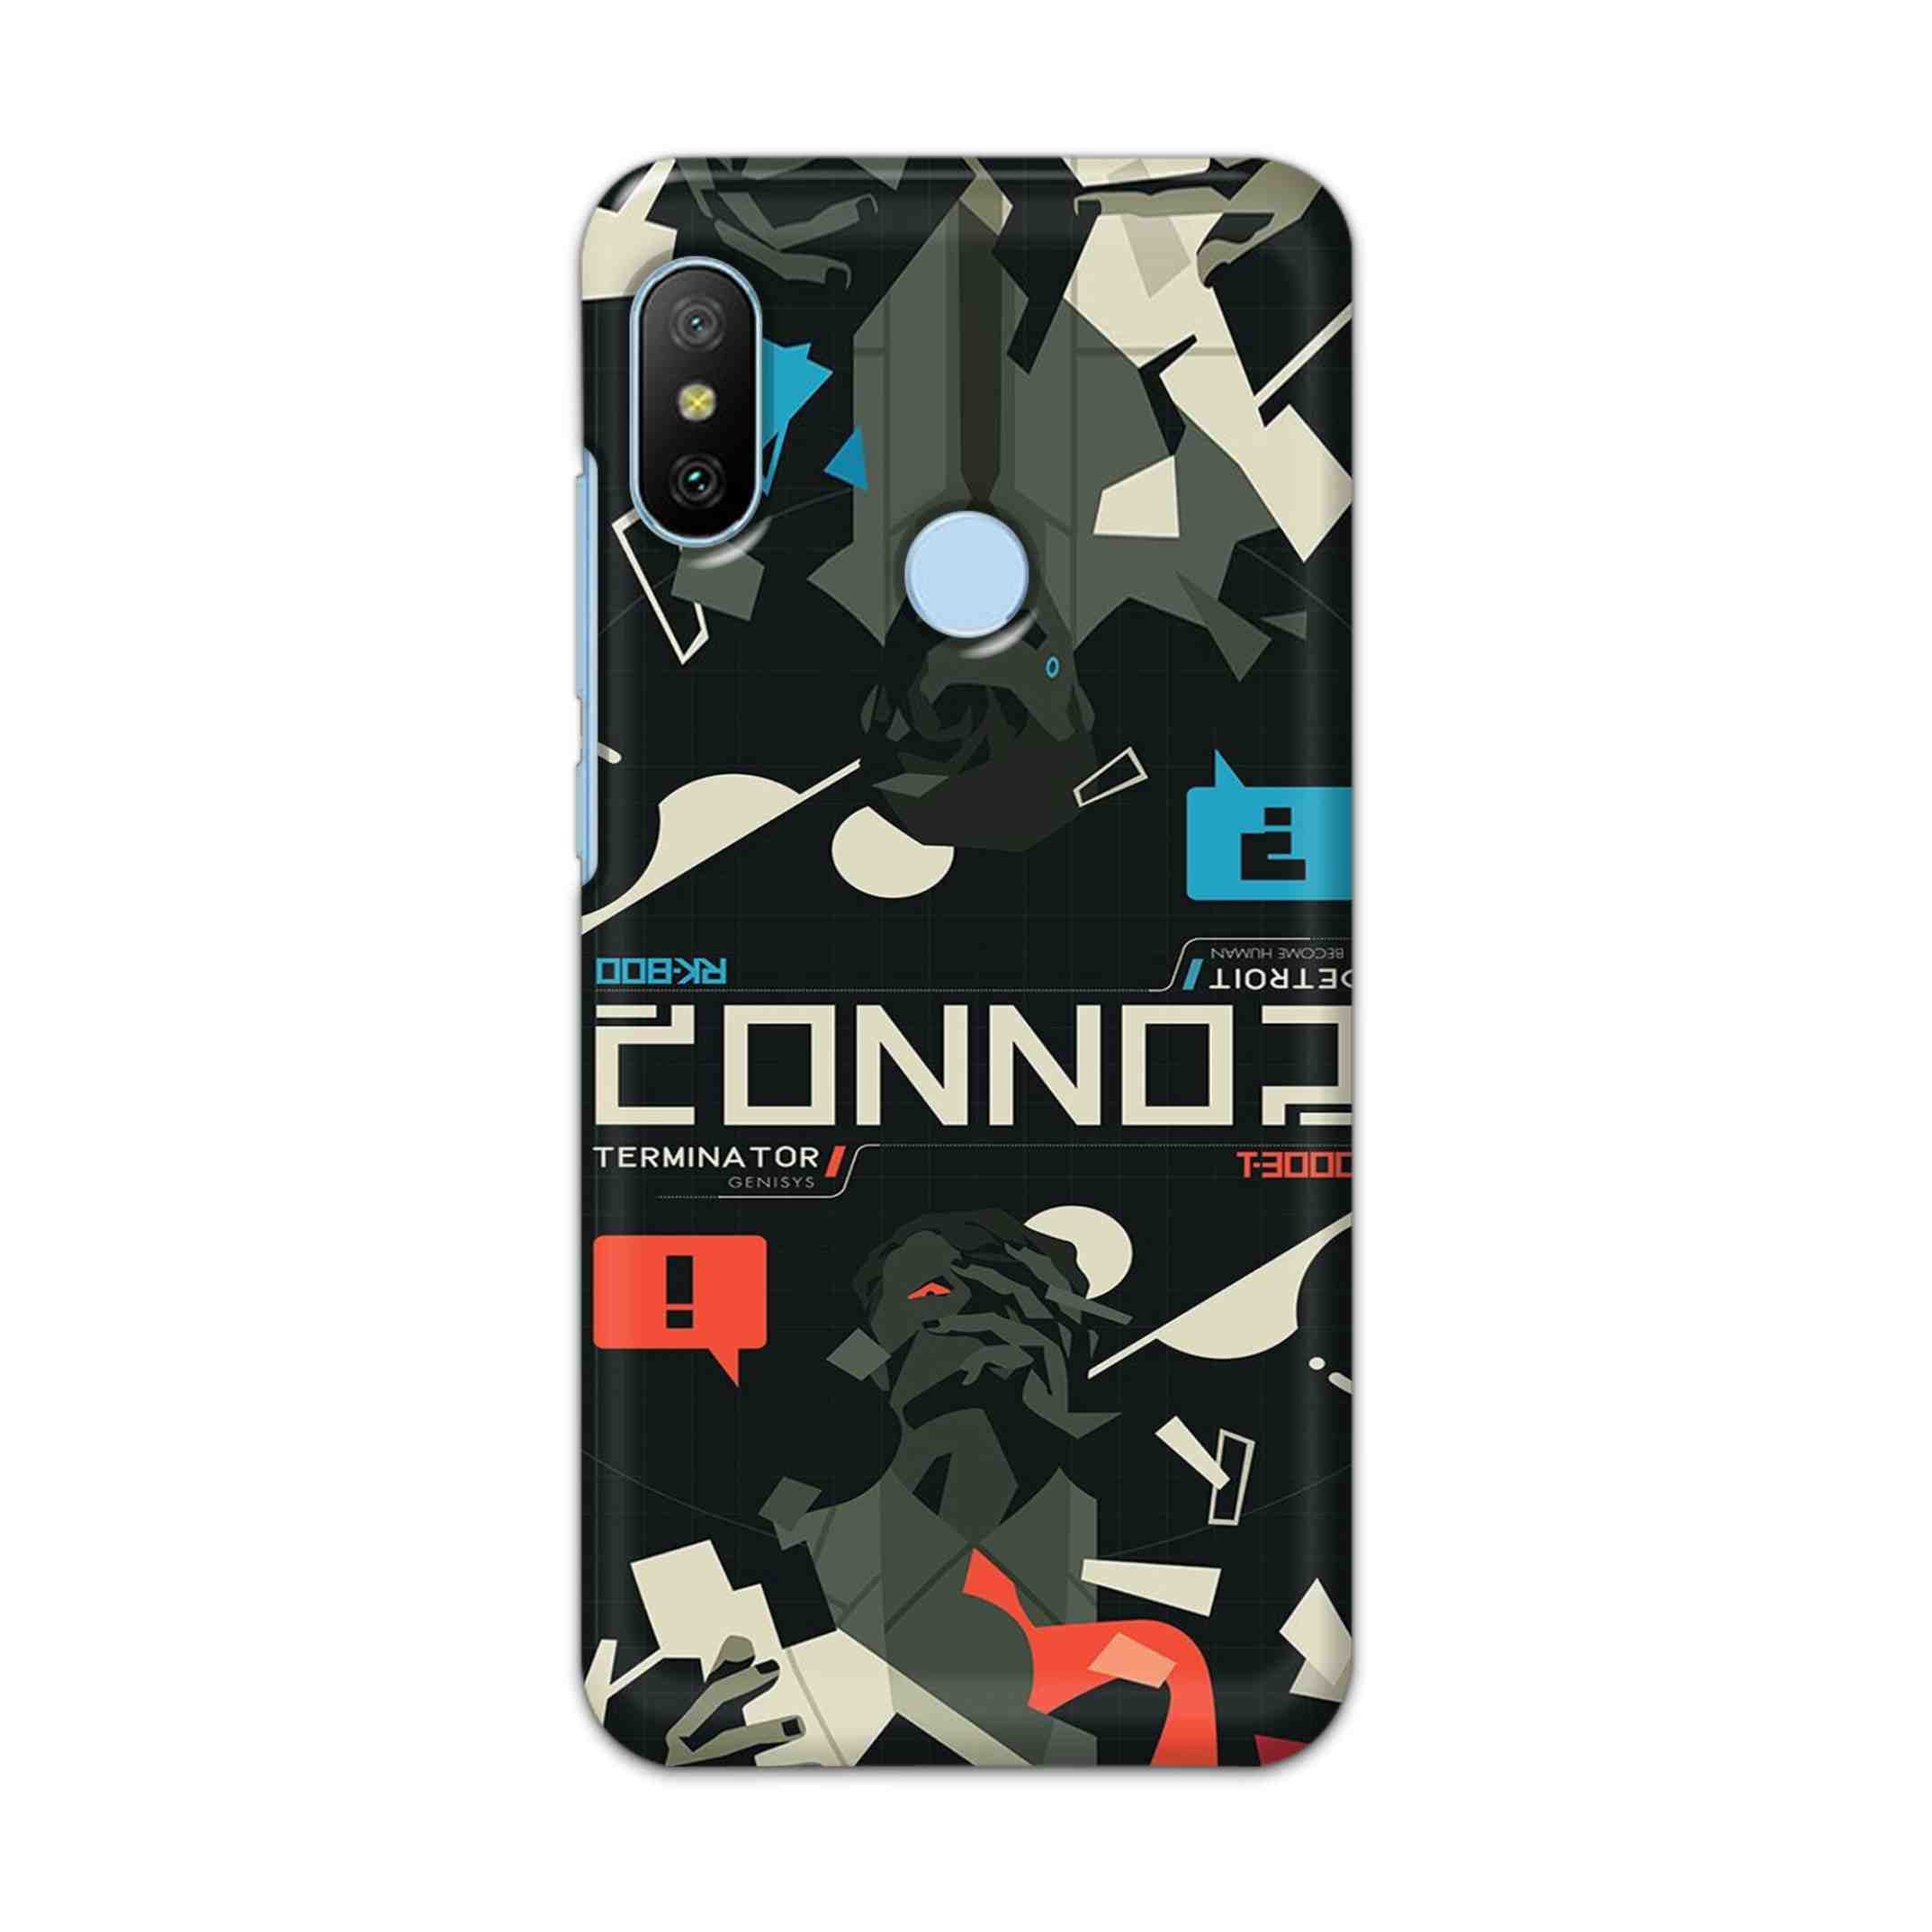 Buy Terminator Hard Back Mobile Phone Case/Cover For Xiaomi Redmi 6 Pro Online